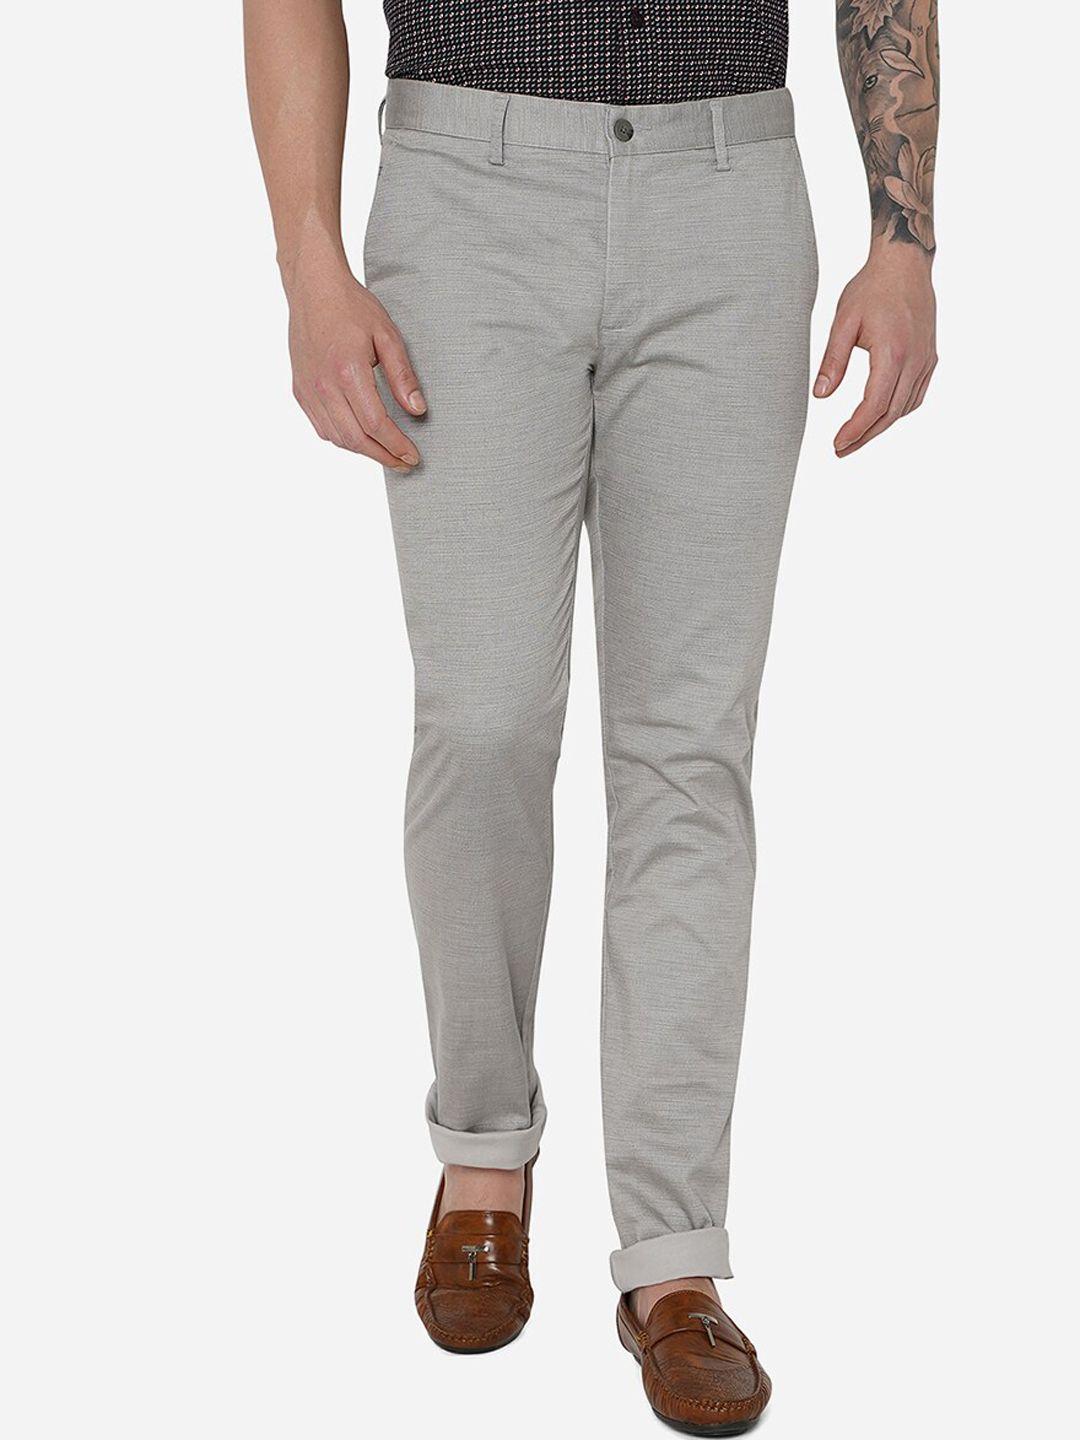 greenfibre men grey slim fit chinos trousers